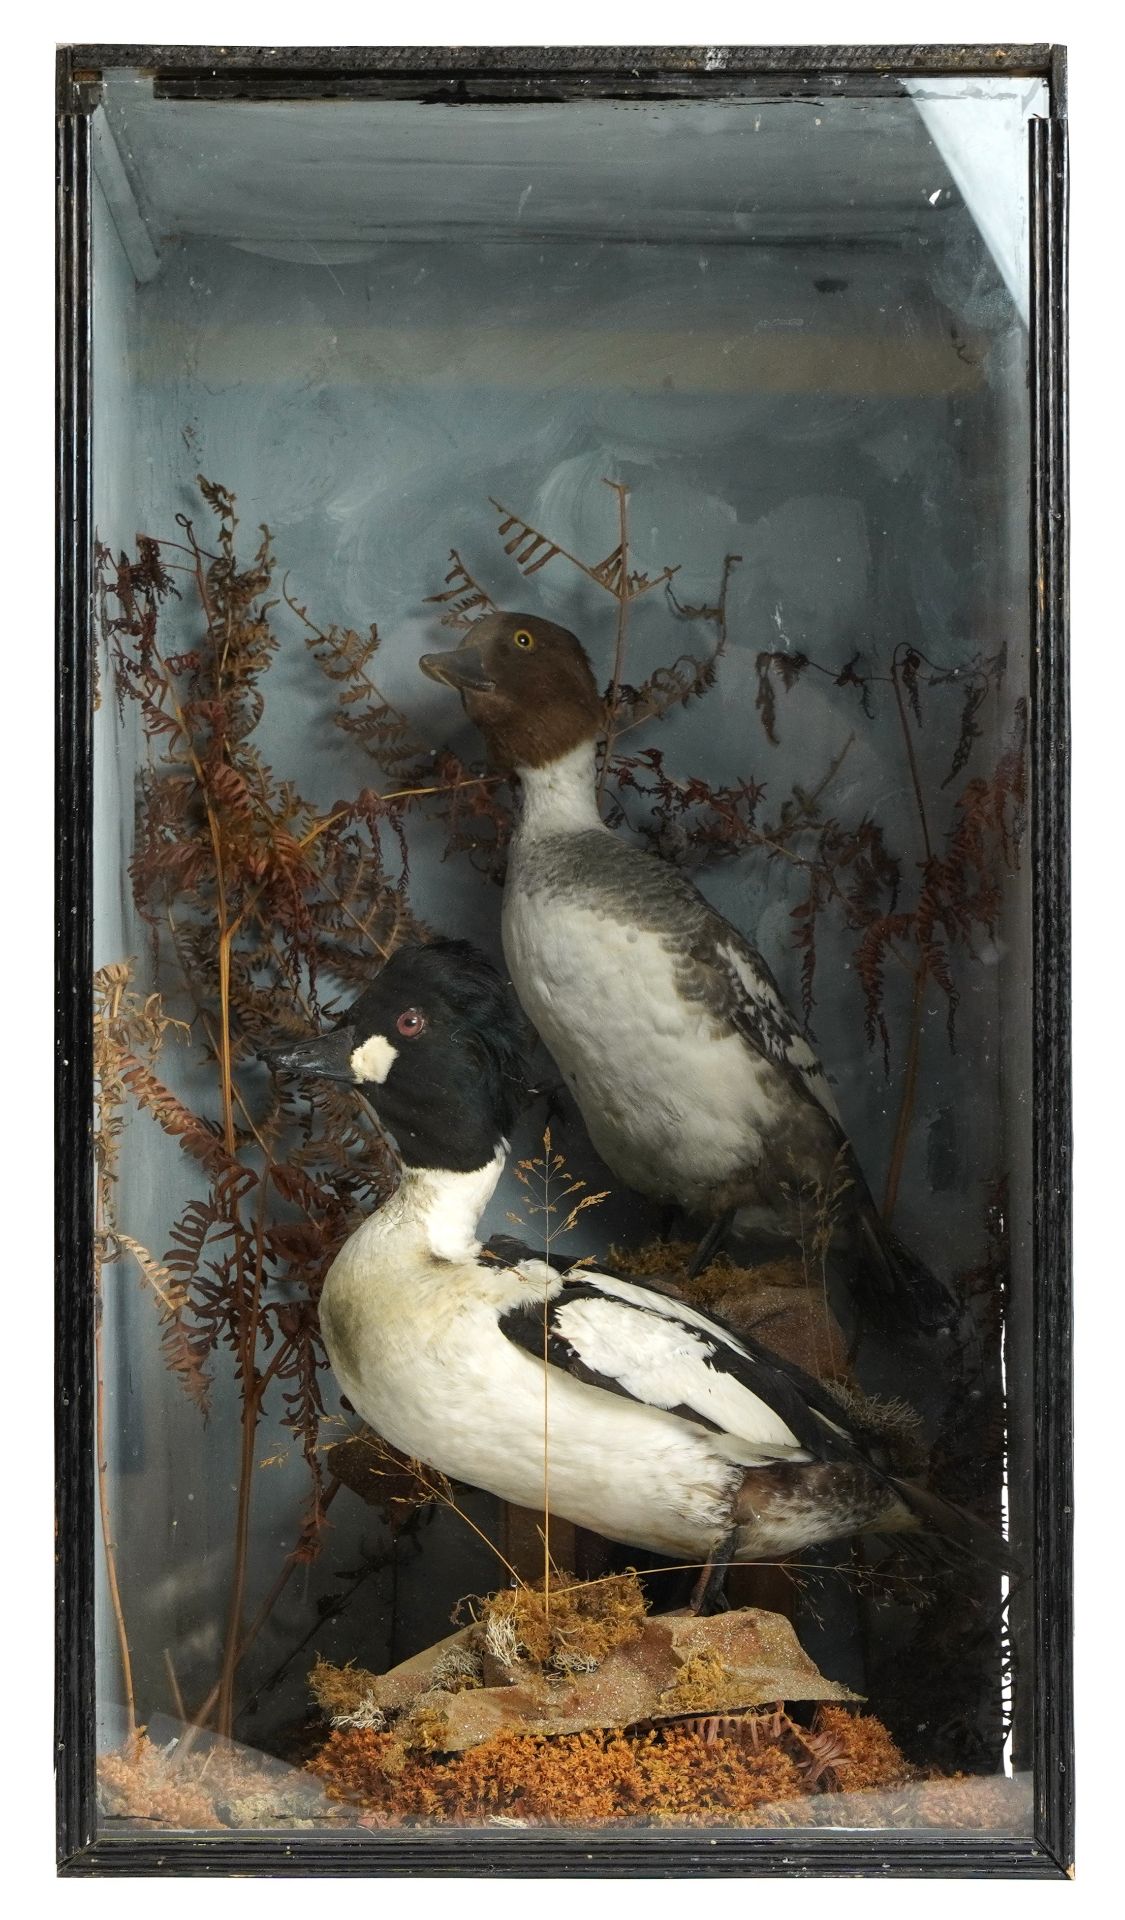 Pair of early 20th century Tufted ducks, Aythya Fuligula housed in an ebonised display case with